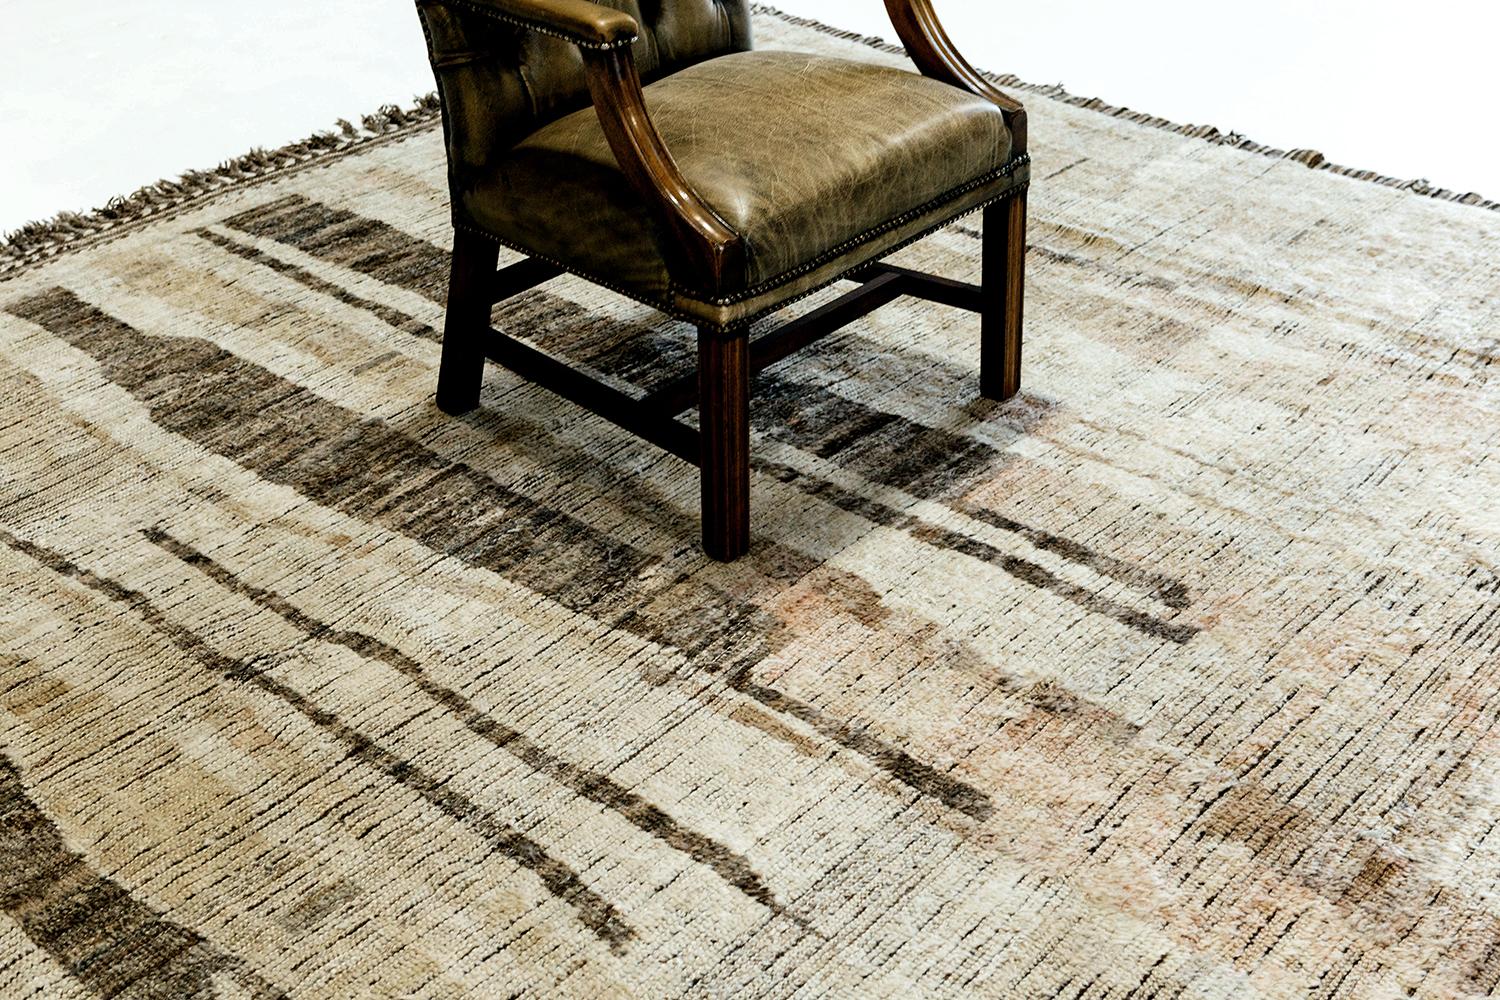 Talassemtane' is a beautifully textured rug with irregular motifs inspired from the Atlas Mountains of Morocco. Black and sepia tan surrounded by the perfect white shag work cohesively to make for a great contemporary interpretation for the modern